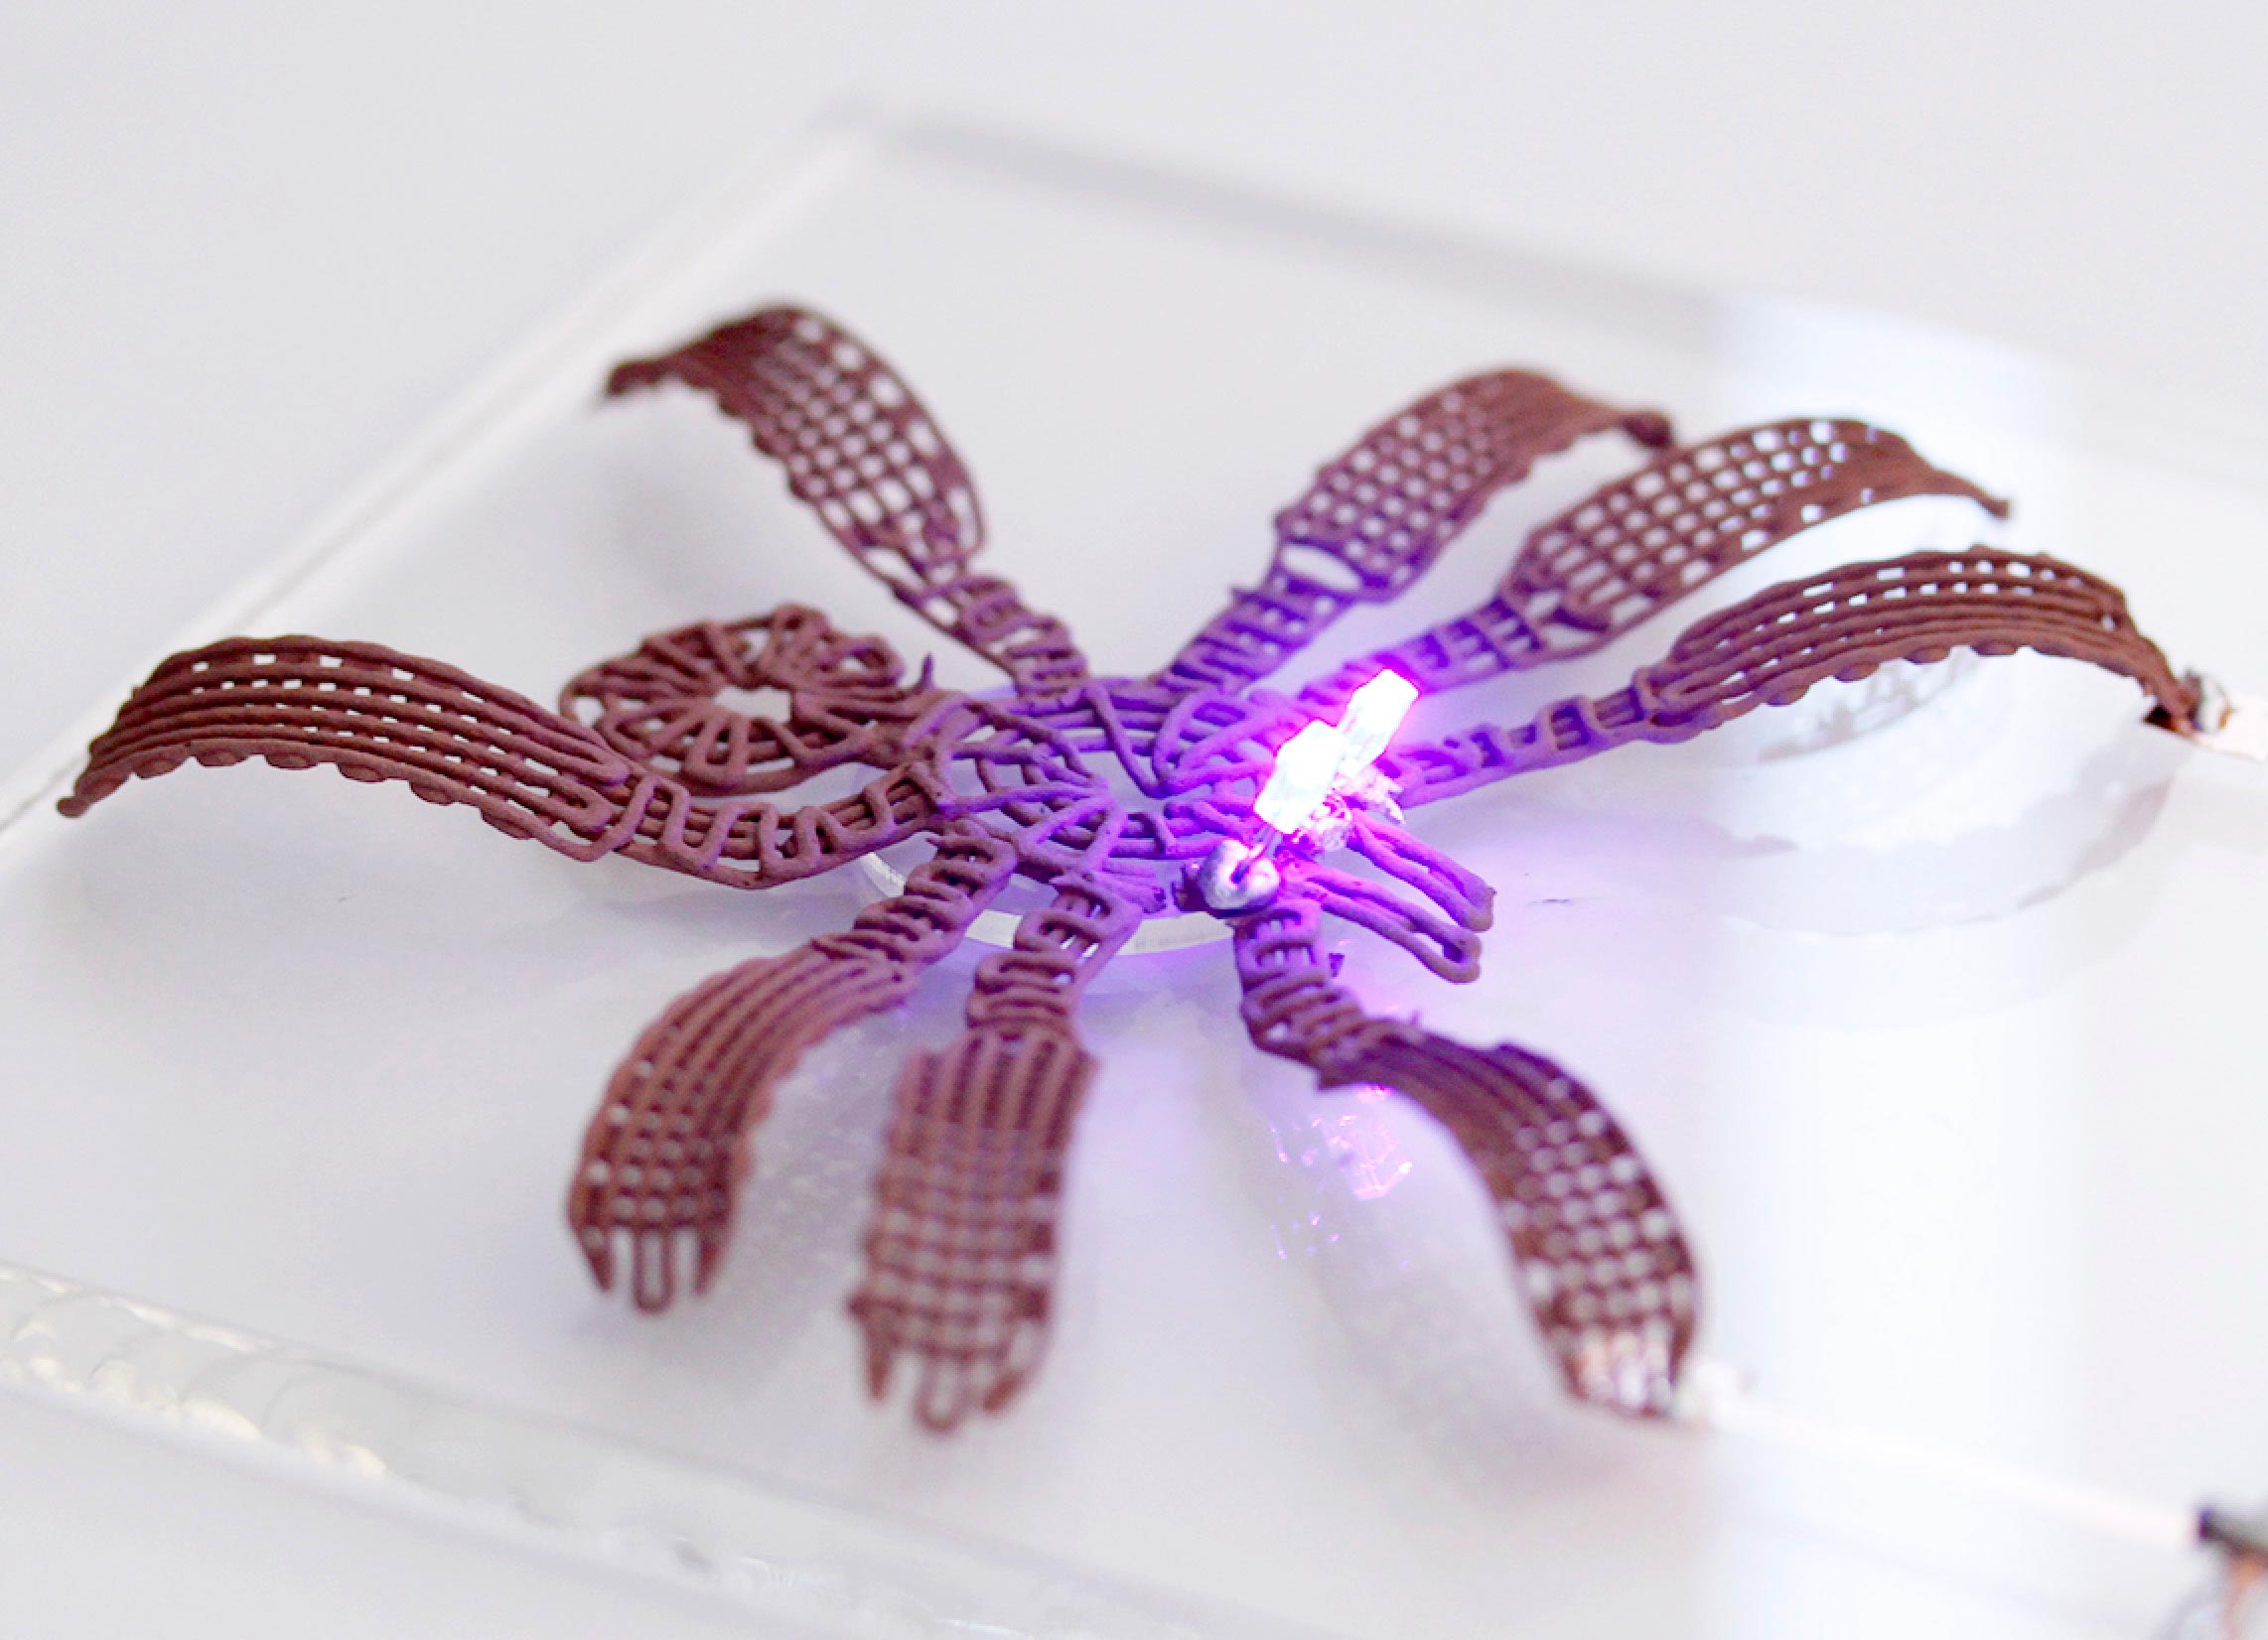 Metallic Gel Enables Shape-Shifting and Conductivity in 3D Prints